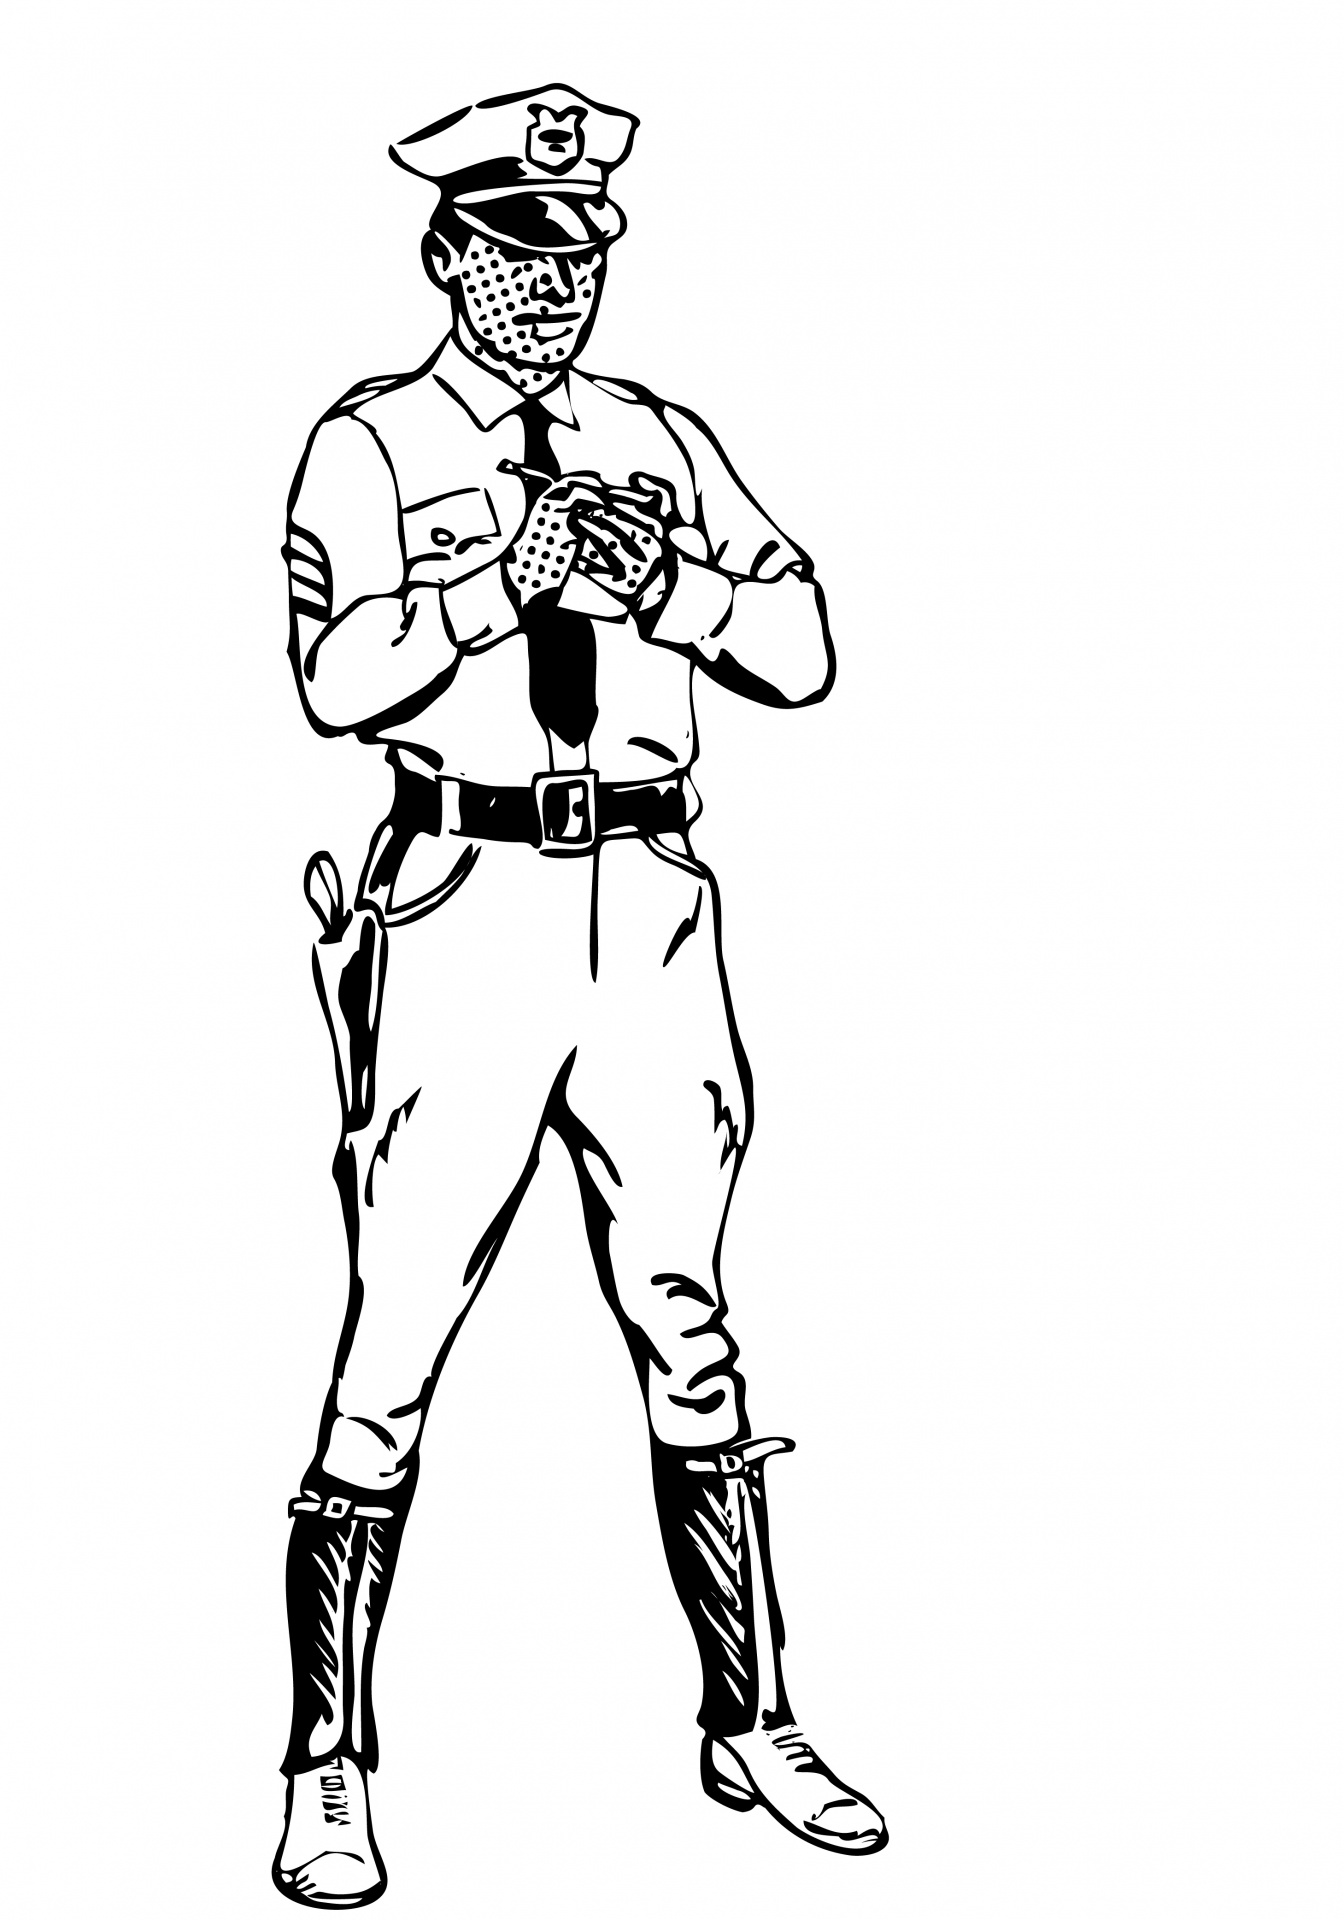 military police clipart images - photo #19